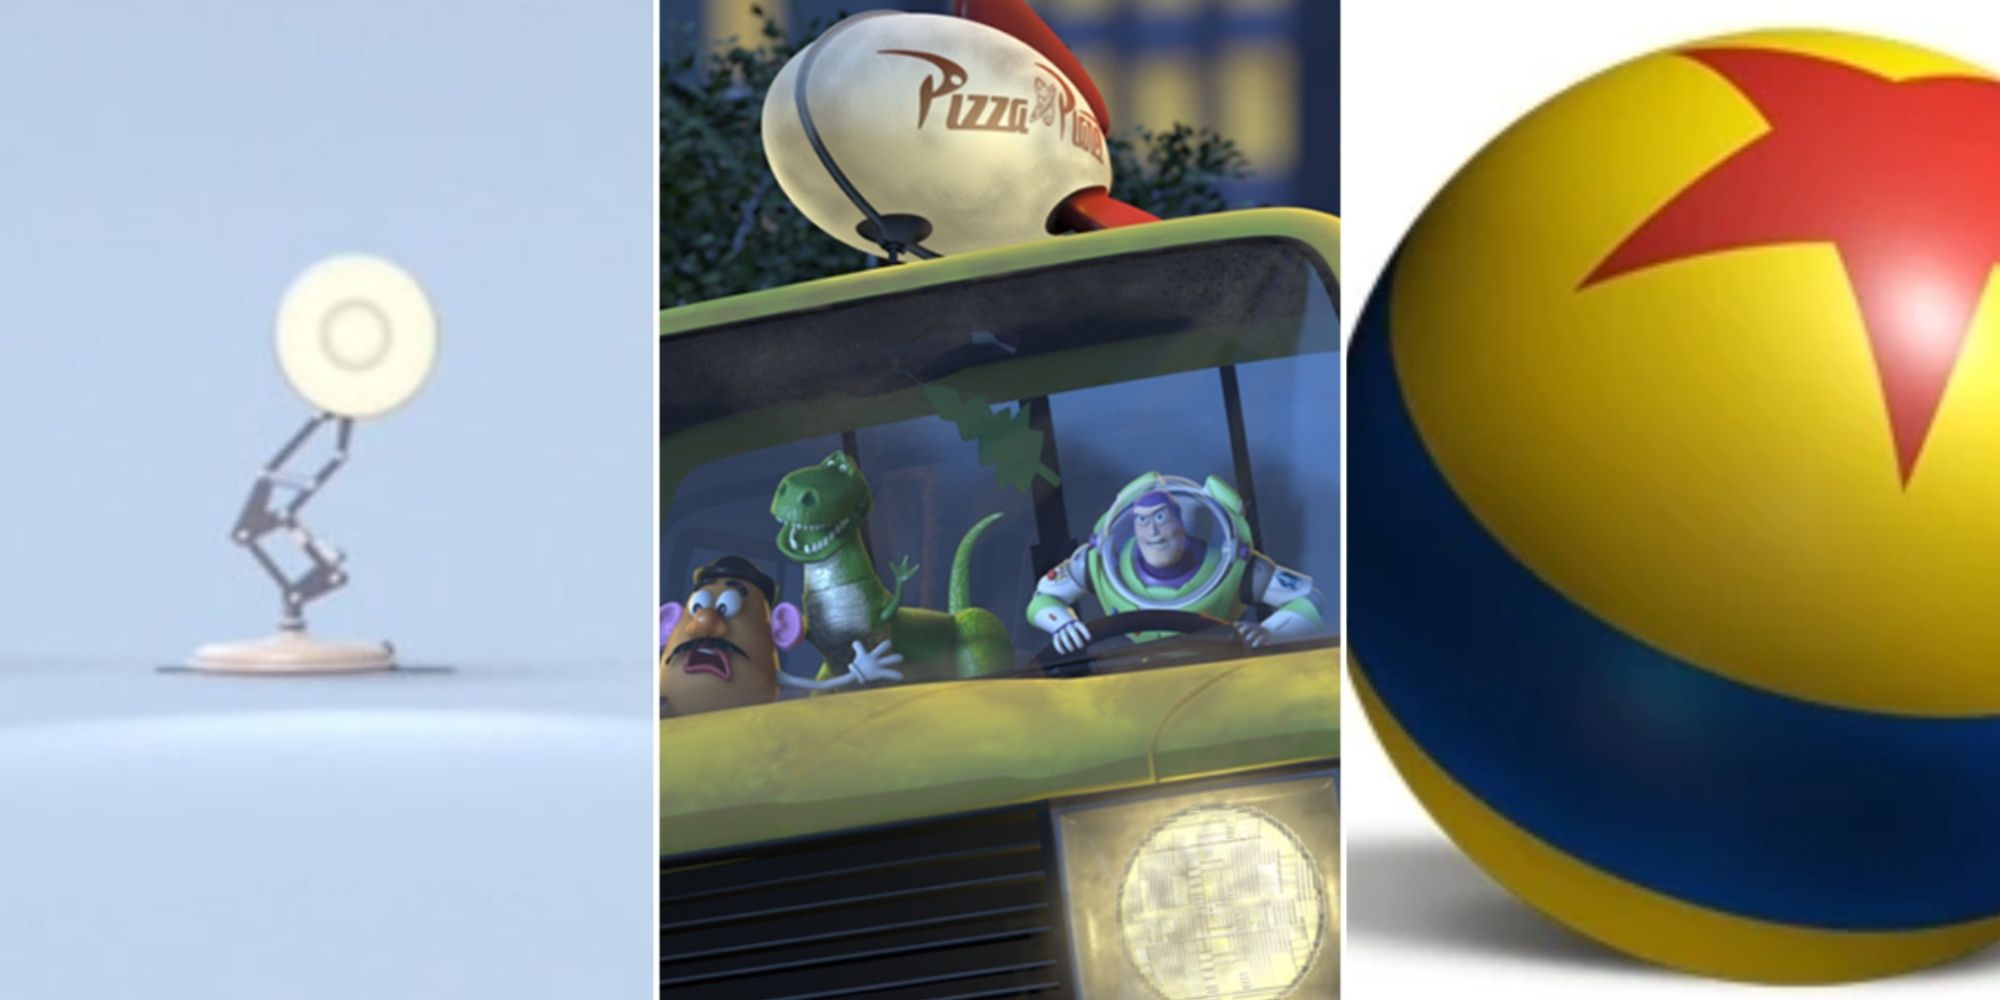 Cover Image For Pixar References Hinting At Other Movies